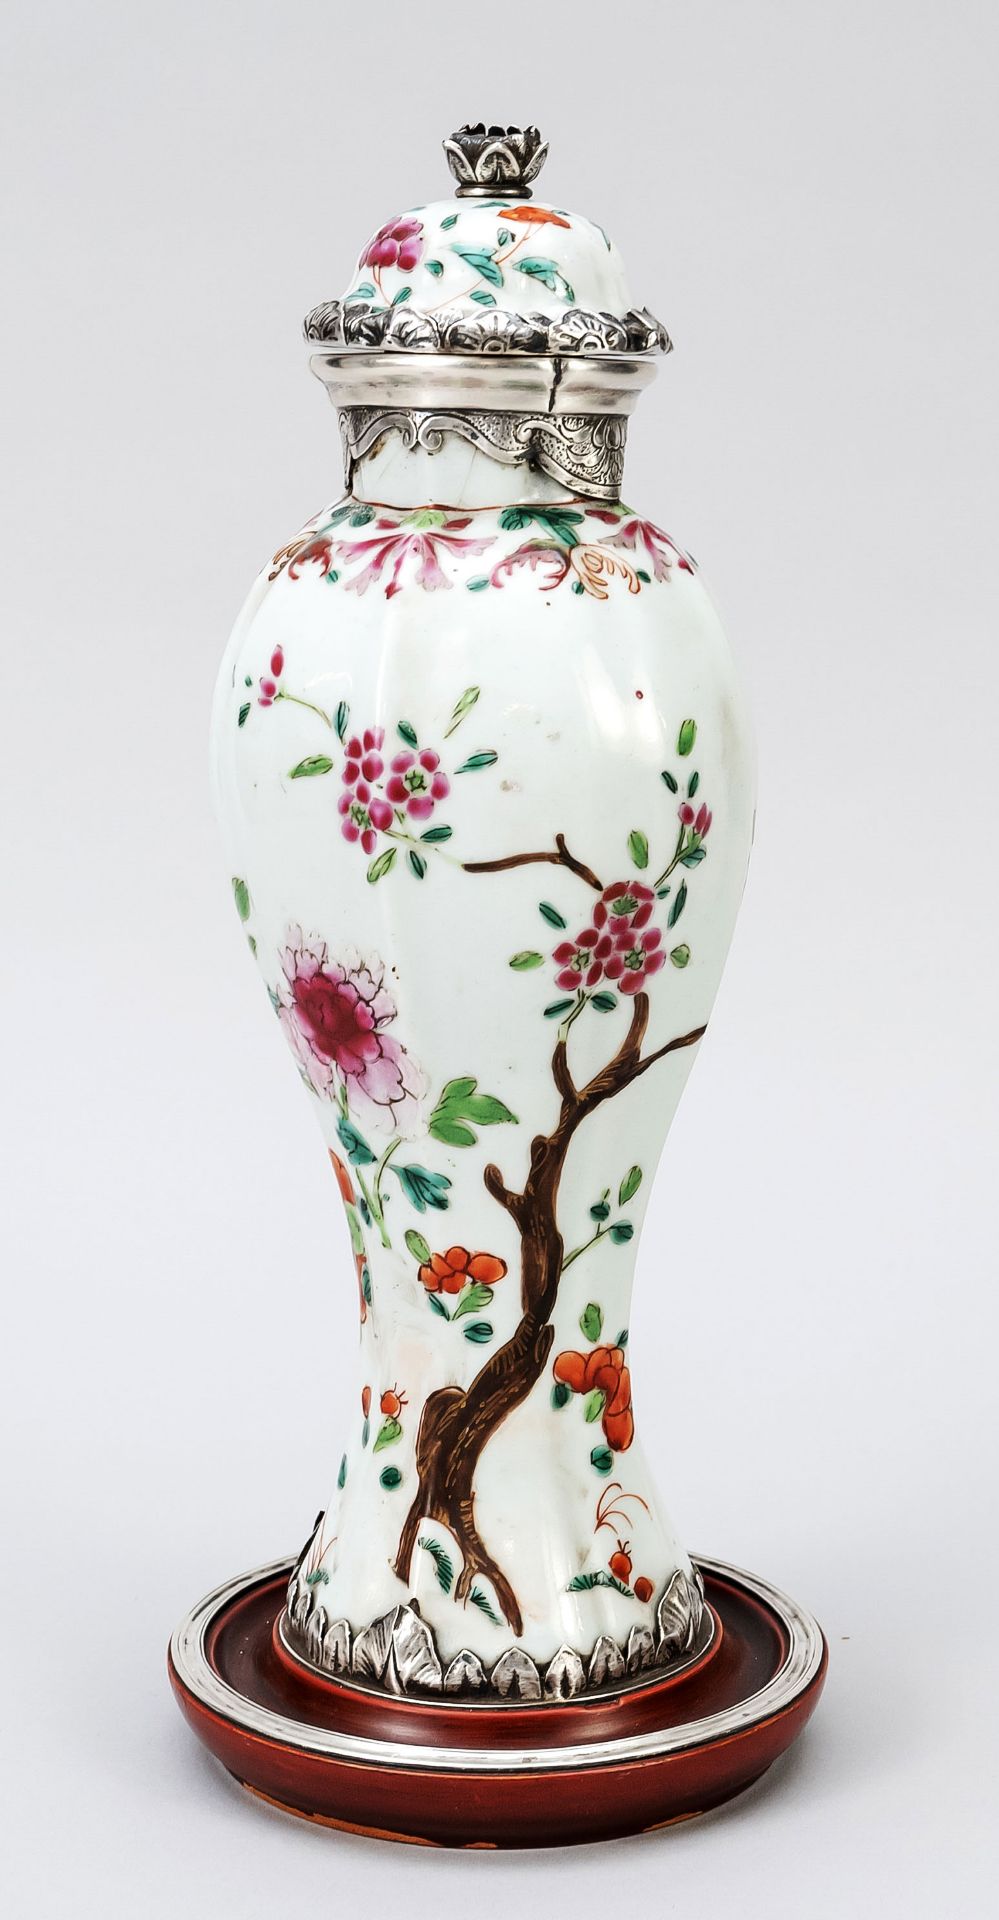 Lidded vase famille rose with silver mount, China, probably Qing Yongzheng period(1723-1735), with